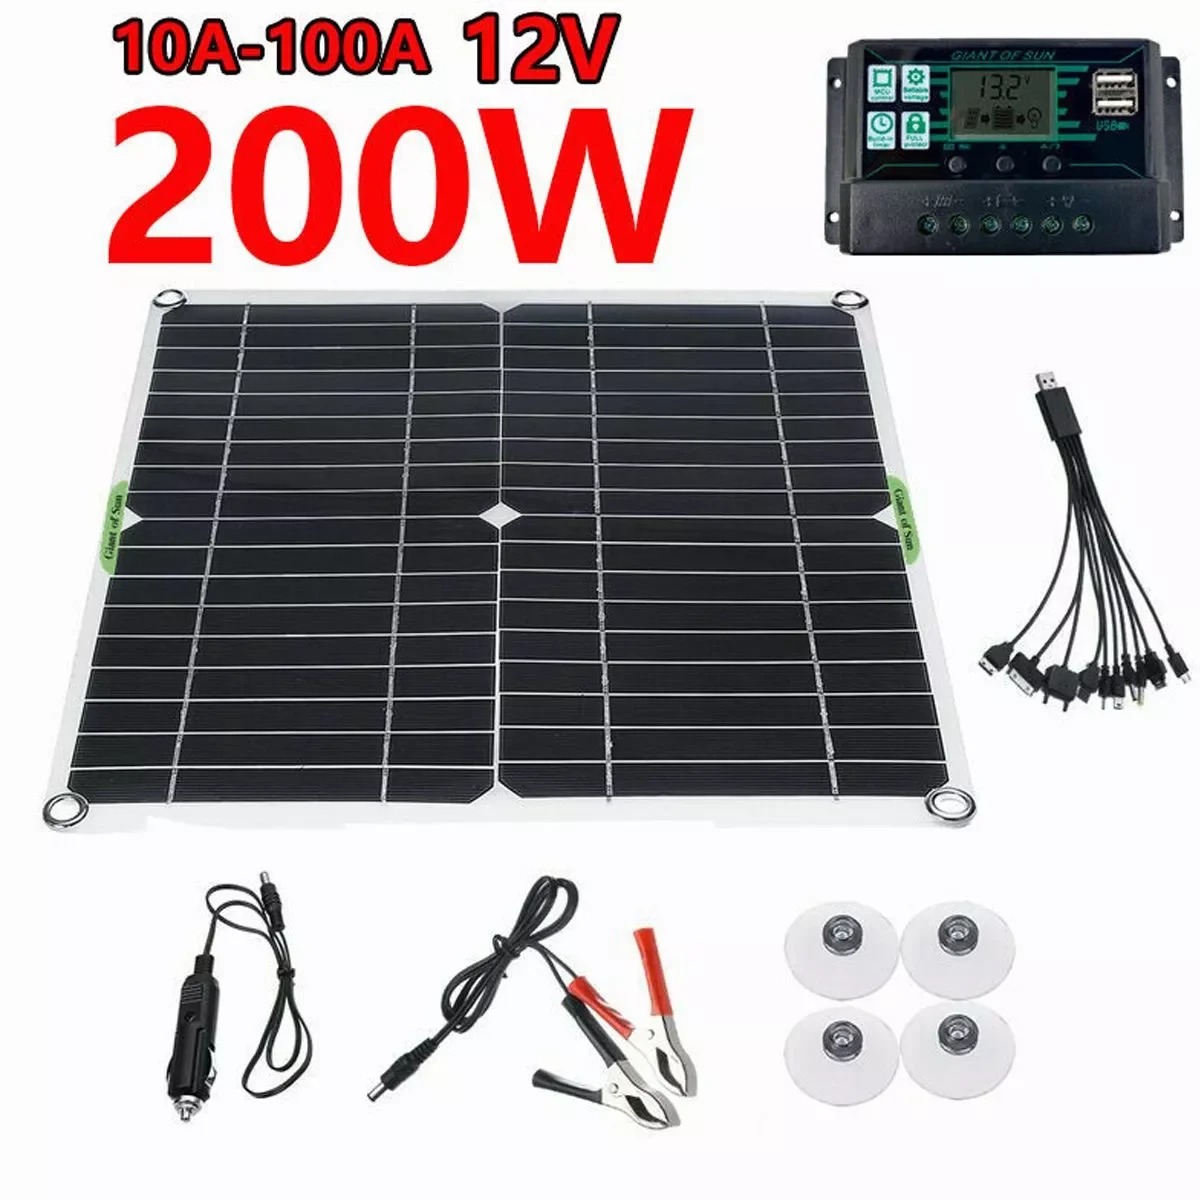 

2022NEW Solar Panel 200W 100A Controller 5V Dual USB Port Outdoor Portable Battery Charger For Mobile Phone Car Yacht RV Lights